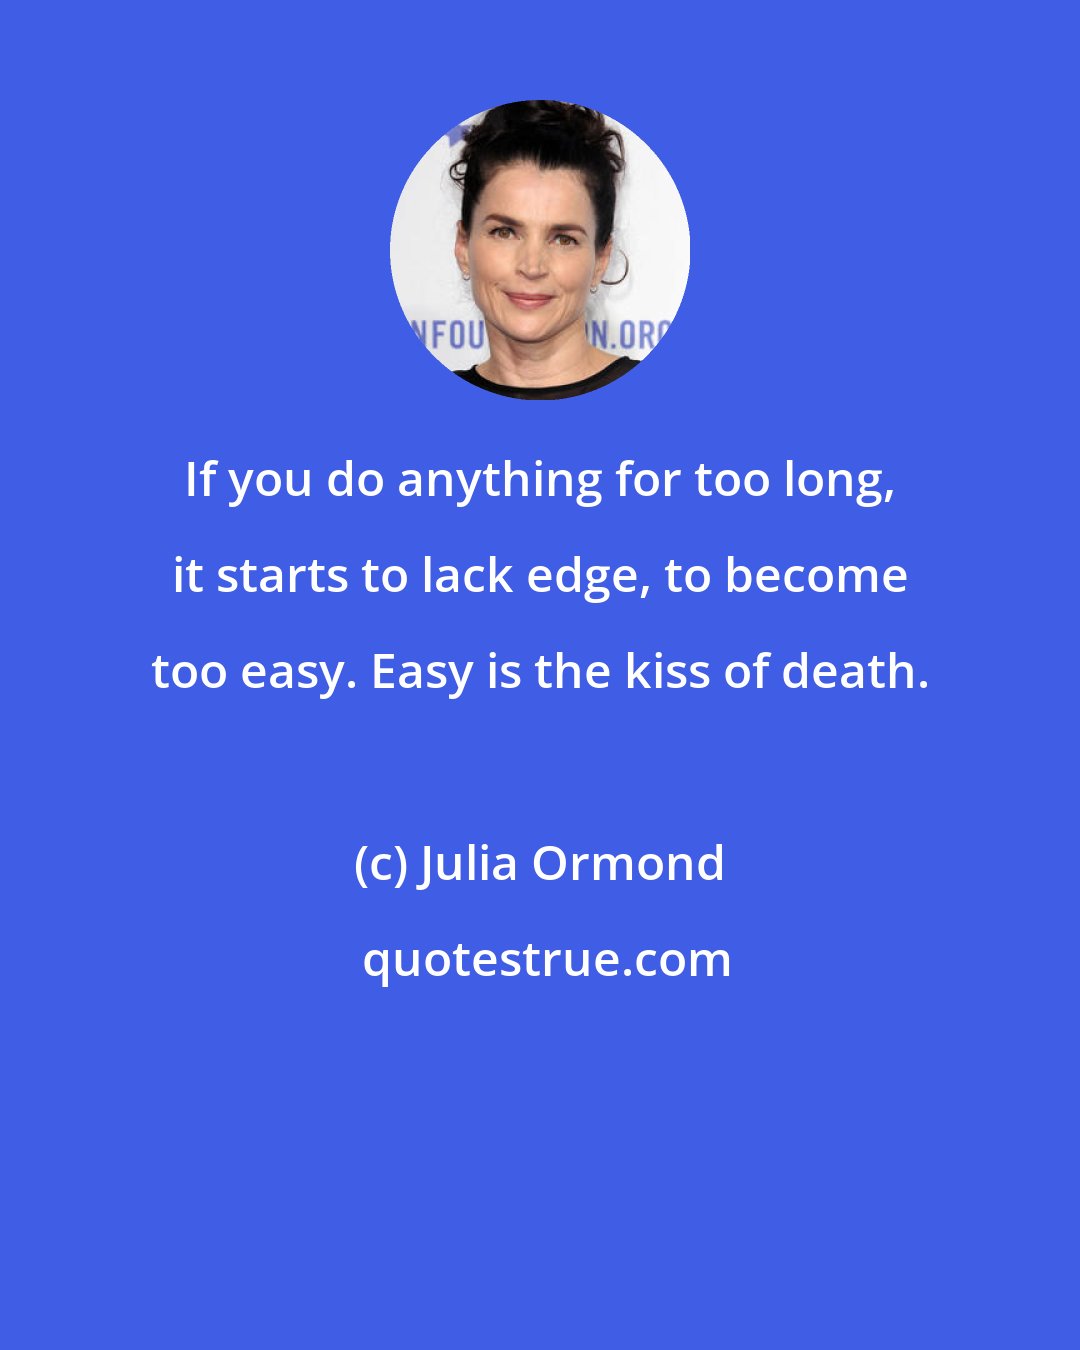 Julia Ormond: If you do anything for too long, it starts to lack edge, to become too easy. Easy is the kiss of death.